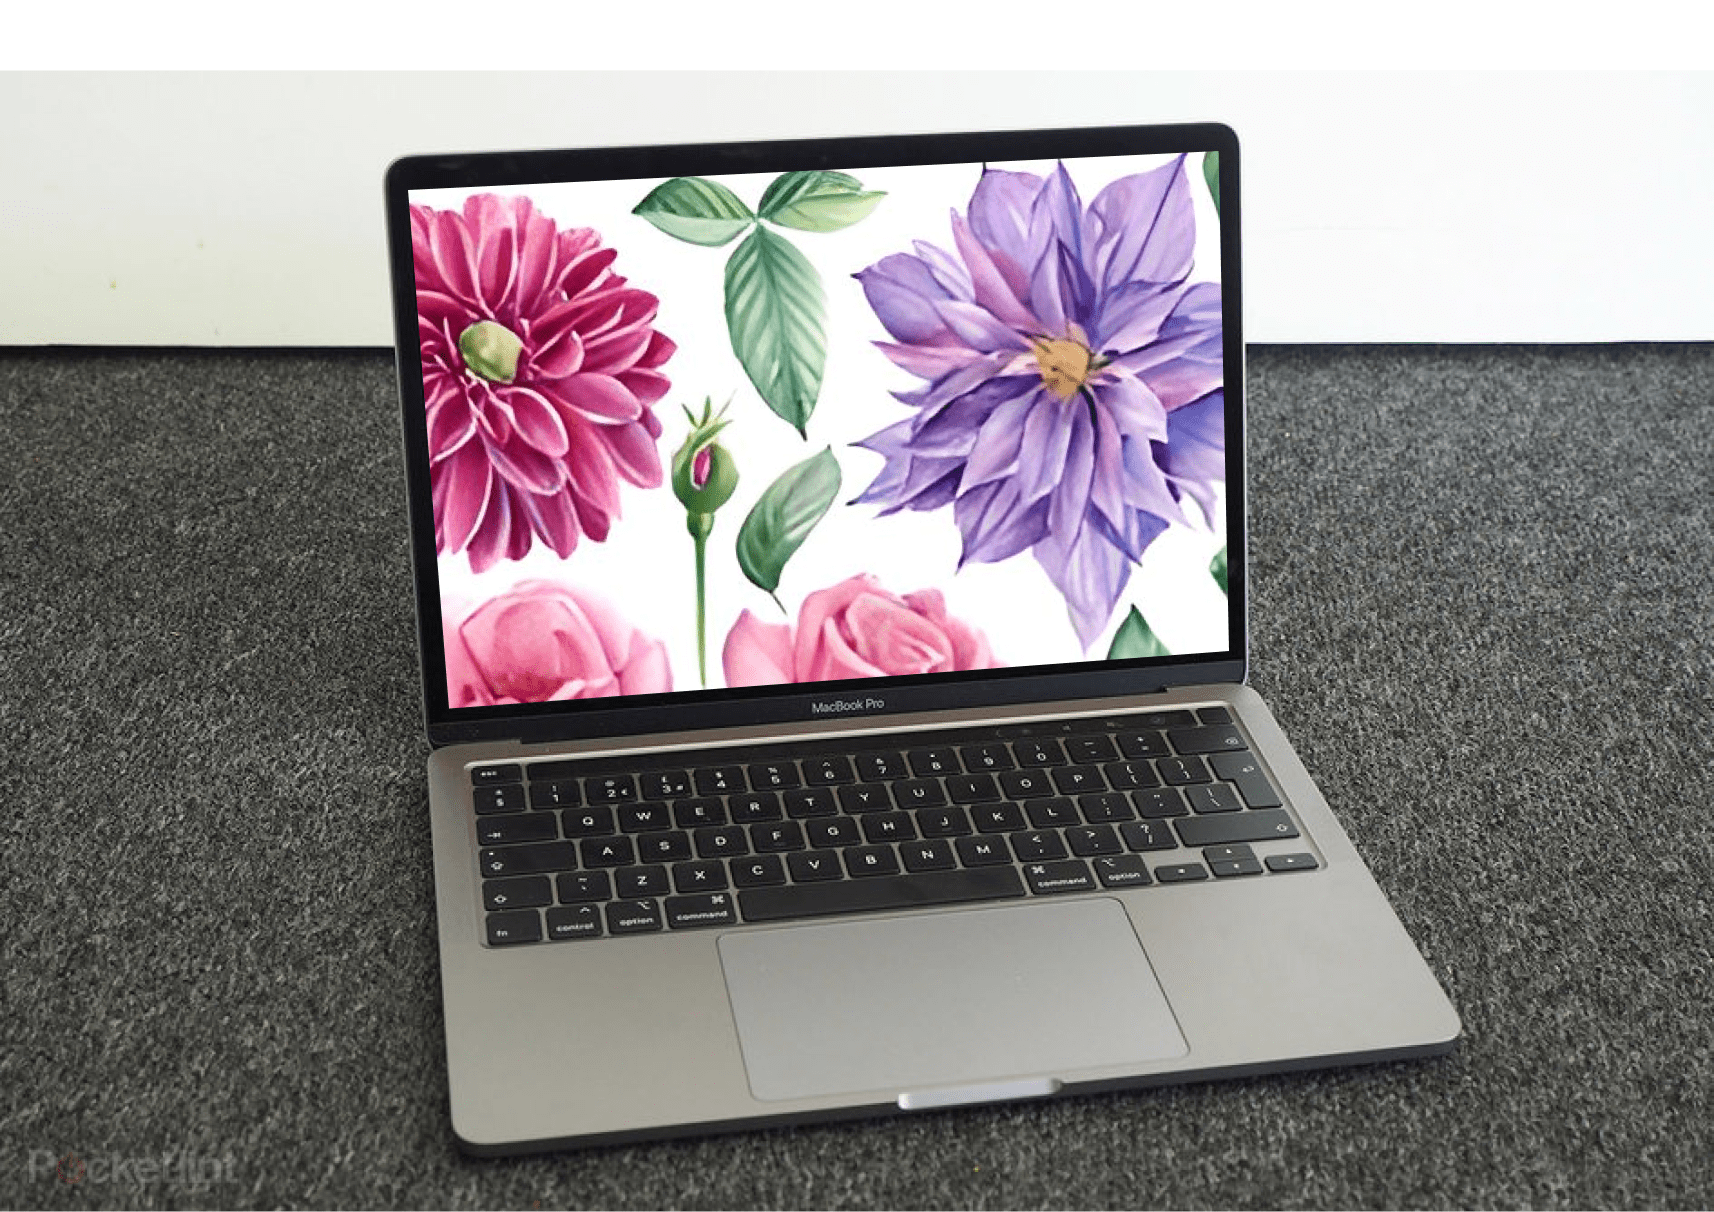 Delicate flowers - Flowers With Leaves On The Laptop.